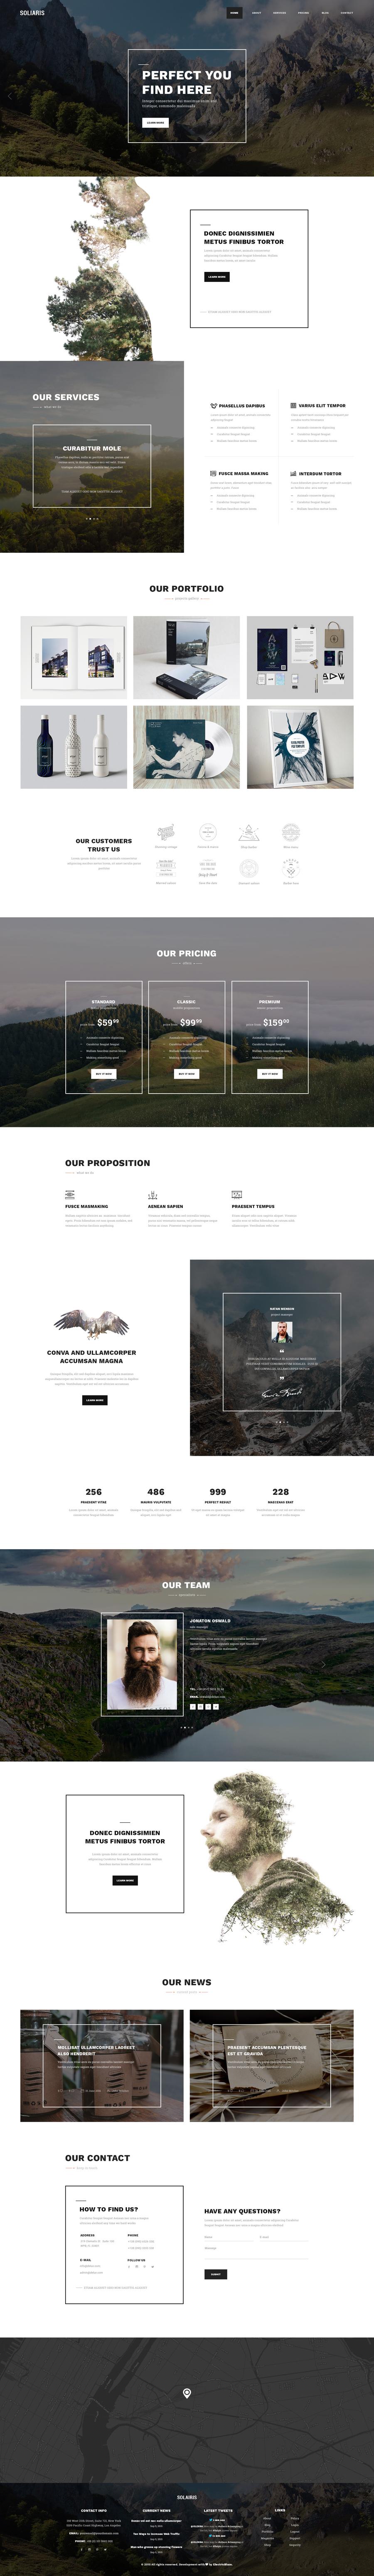 Soliaris - 18 One Page Bootstrap Templates - 5